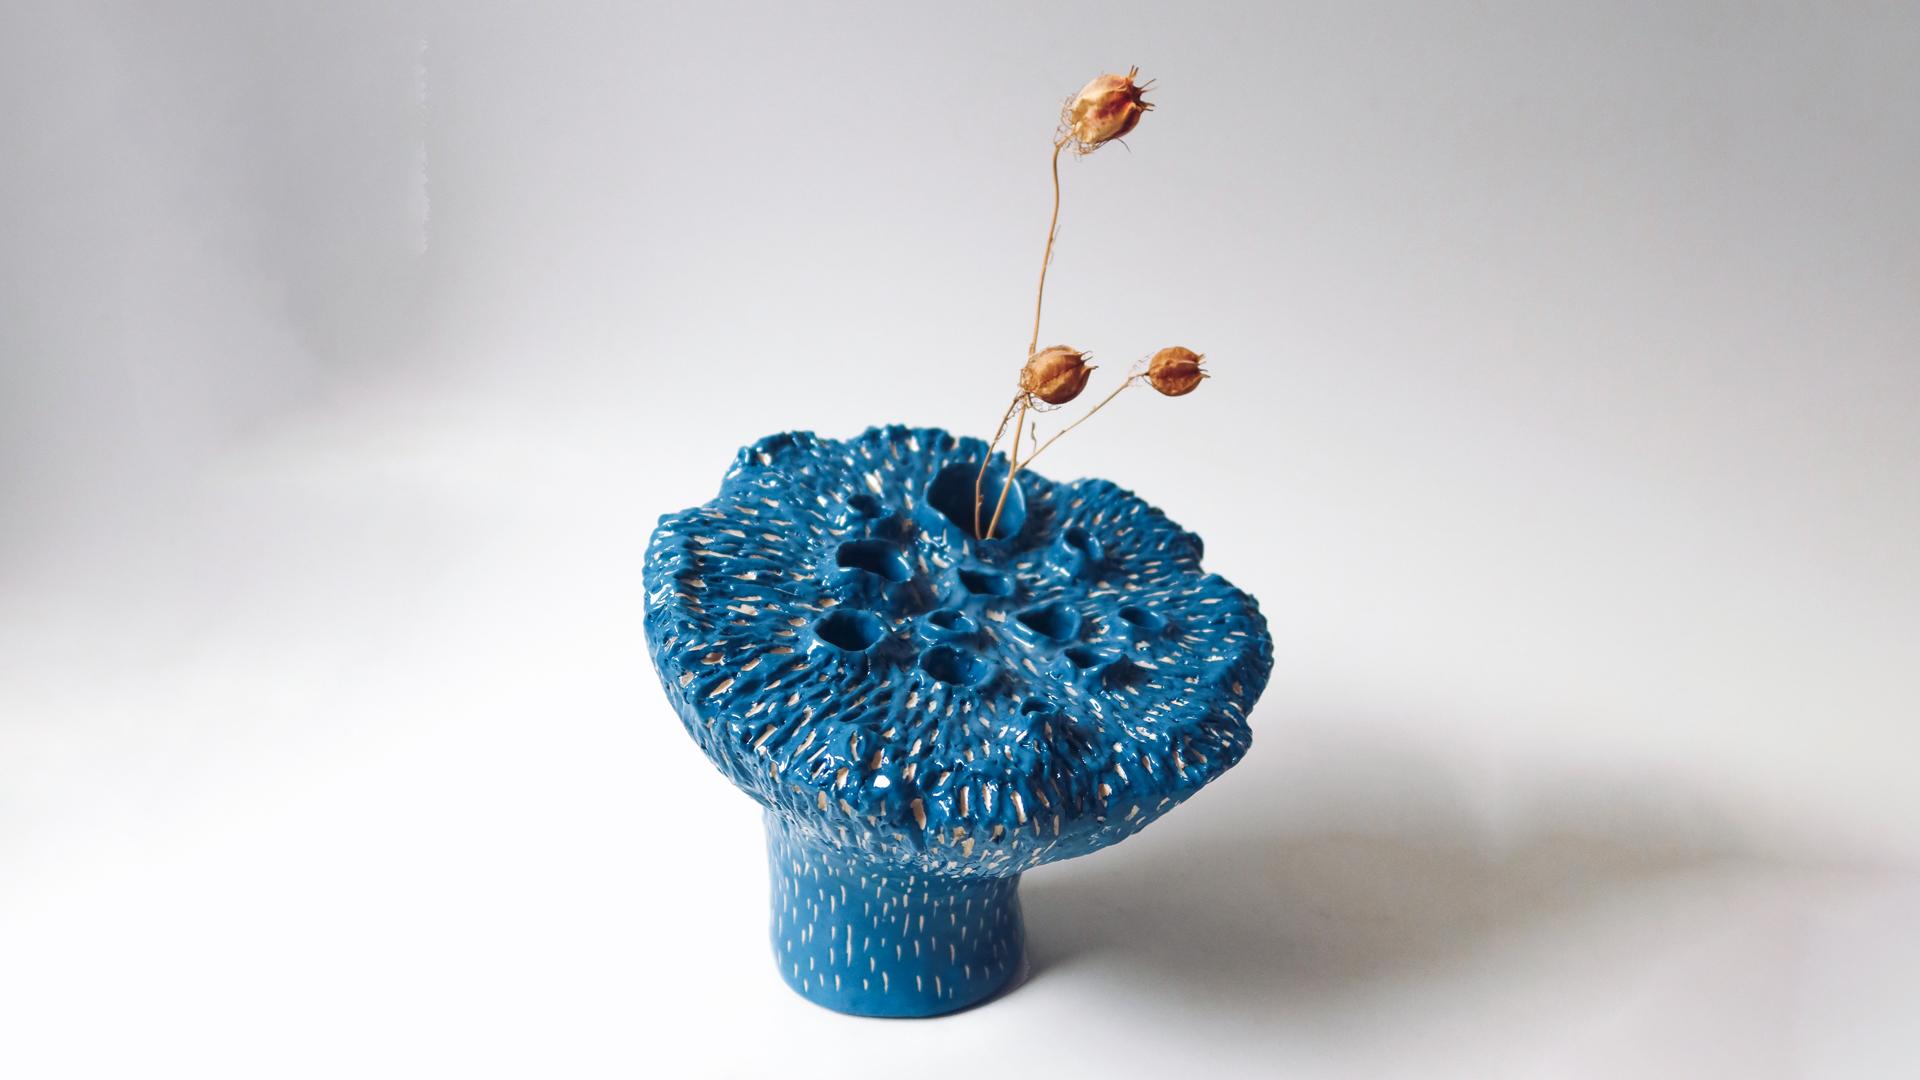 The work is influenced by Jan Ernst's fascination with natural structures such as corals, fungi, and geological formations. The designs have evolved into functional art and sculptural furniture expressed mainly through ceramics and gypsum.
Handmade